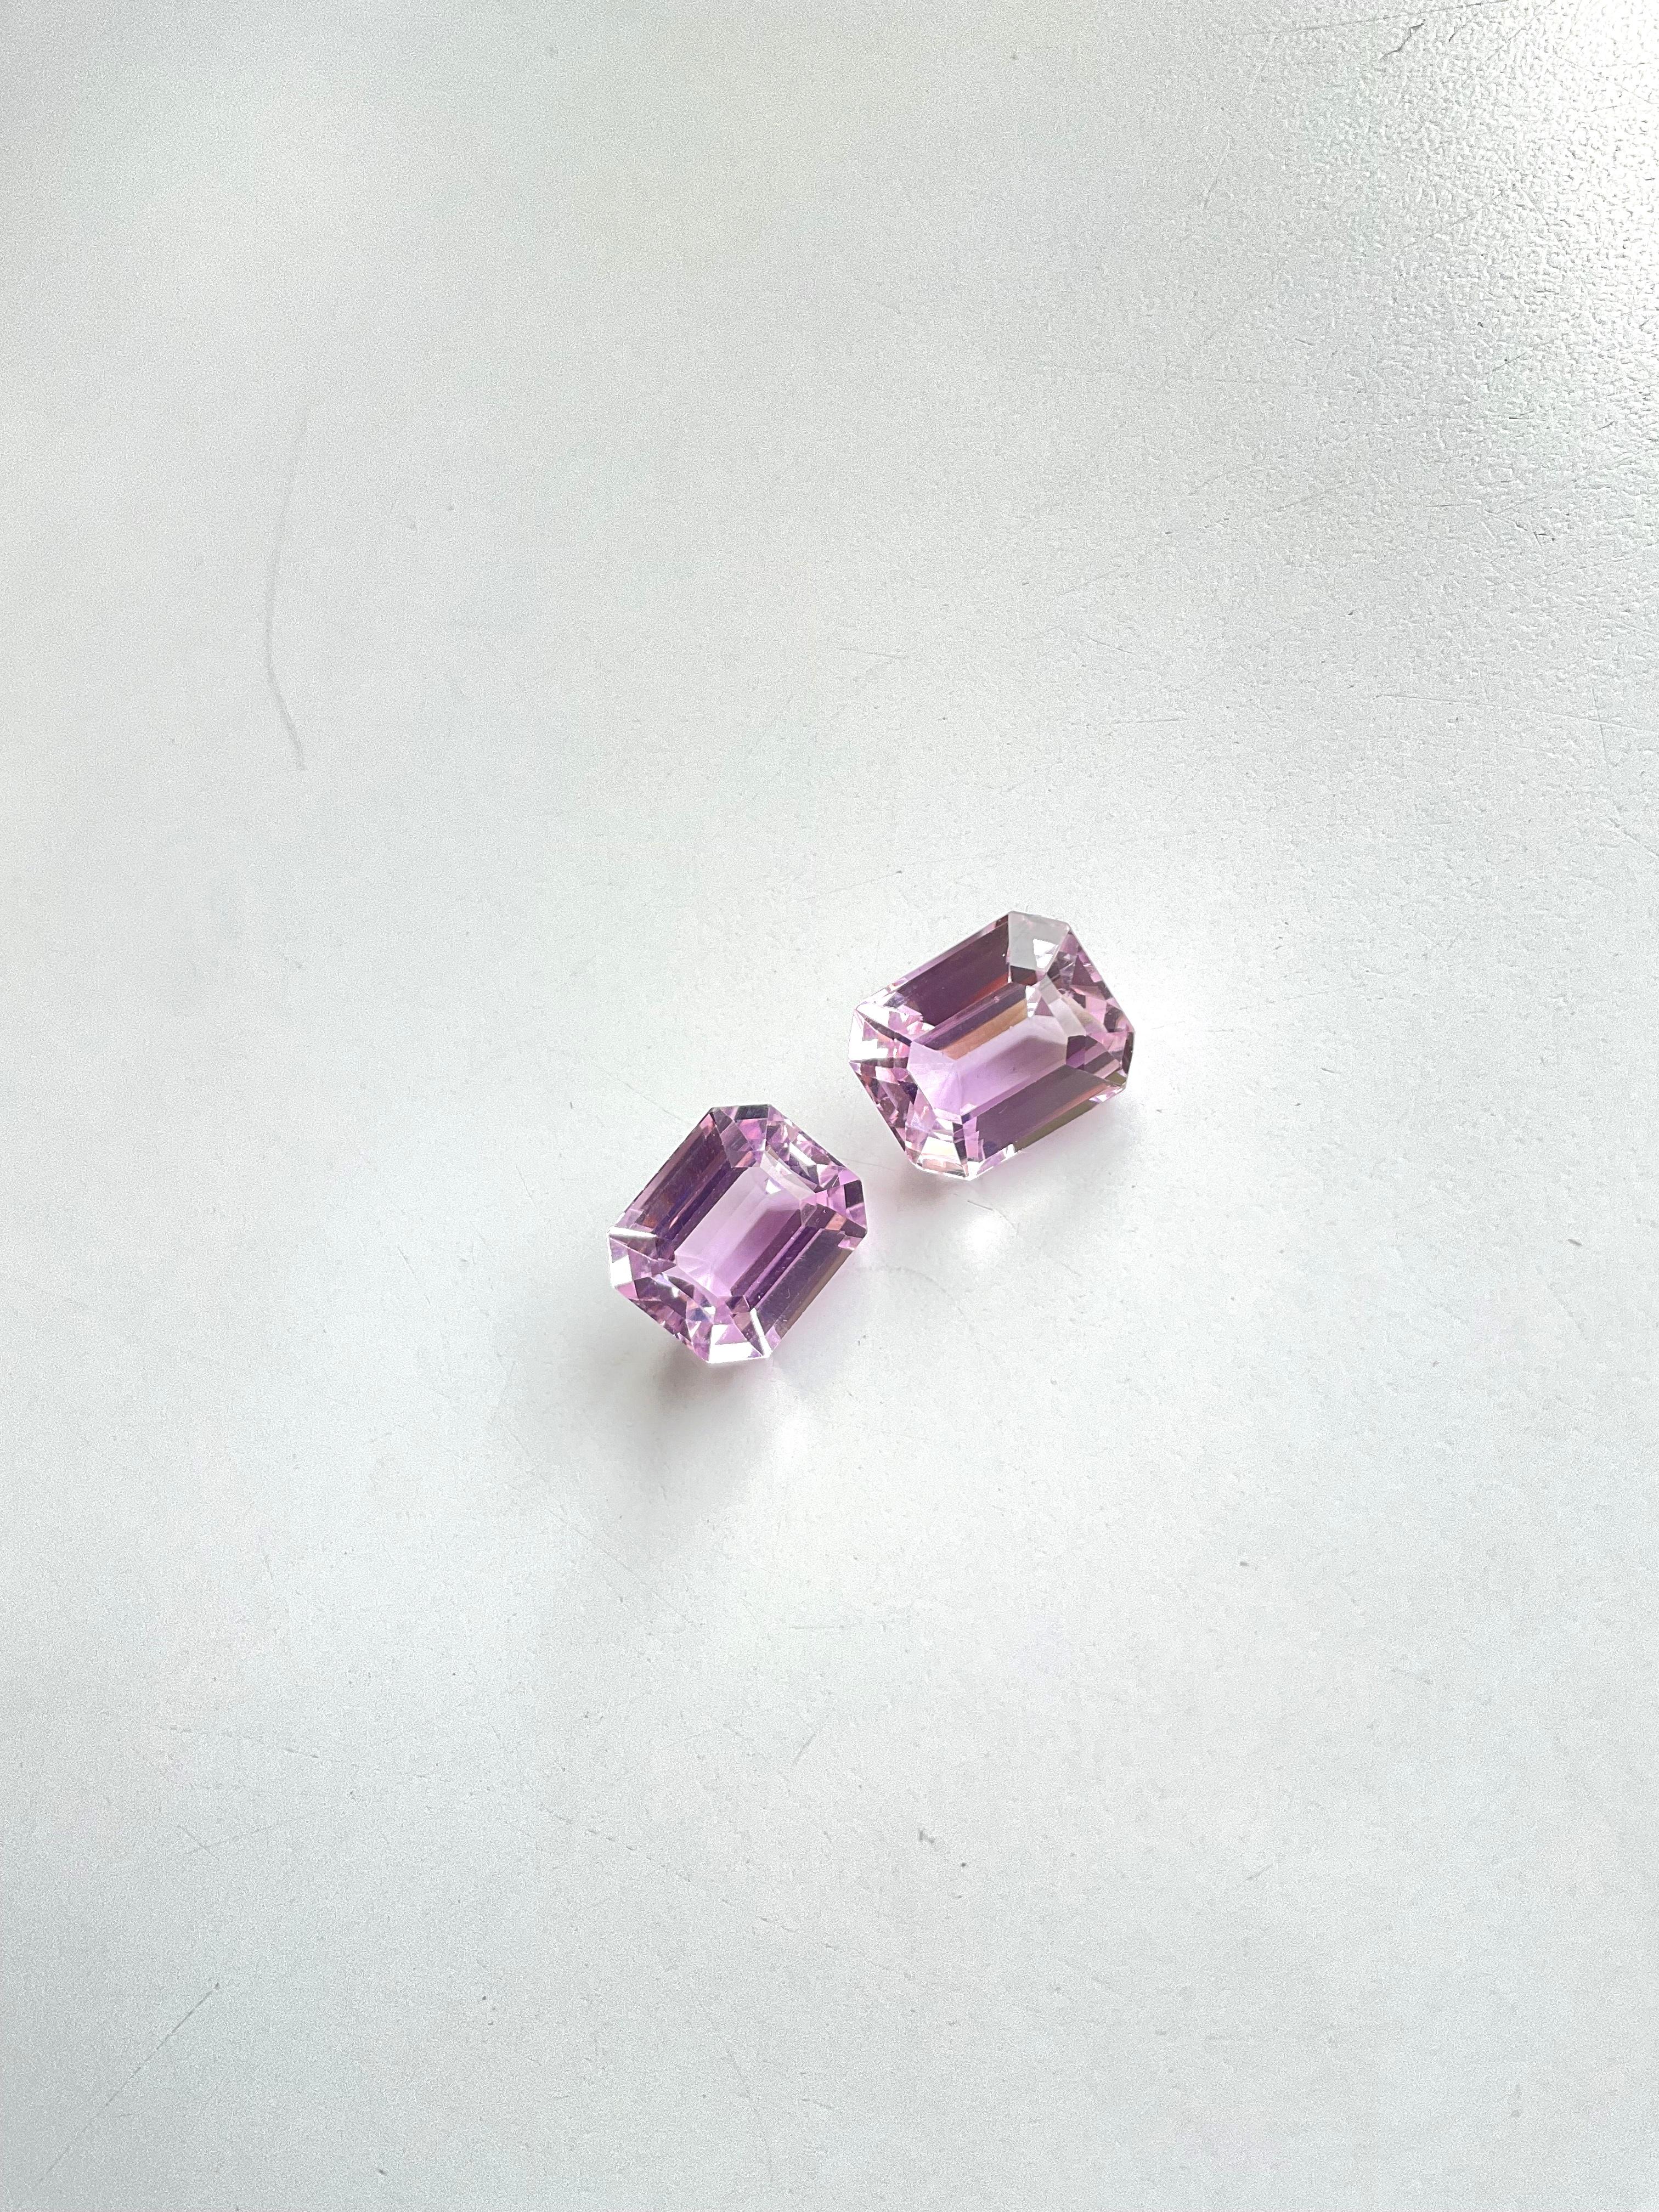 21.89 Carats Pink Kunzite Octagon Natural Cut Stones For Fine Gem Jewellery For Sale 1